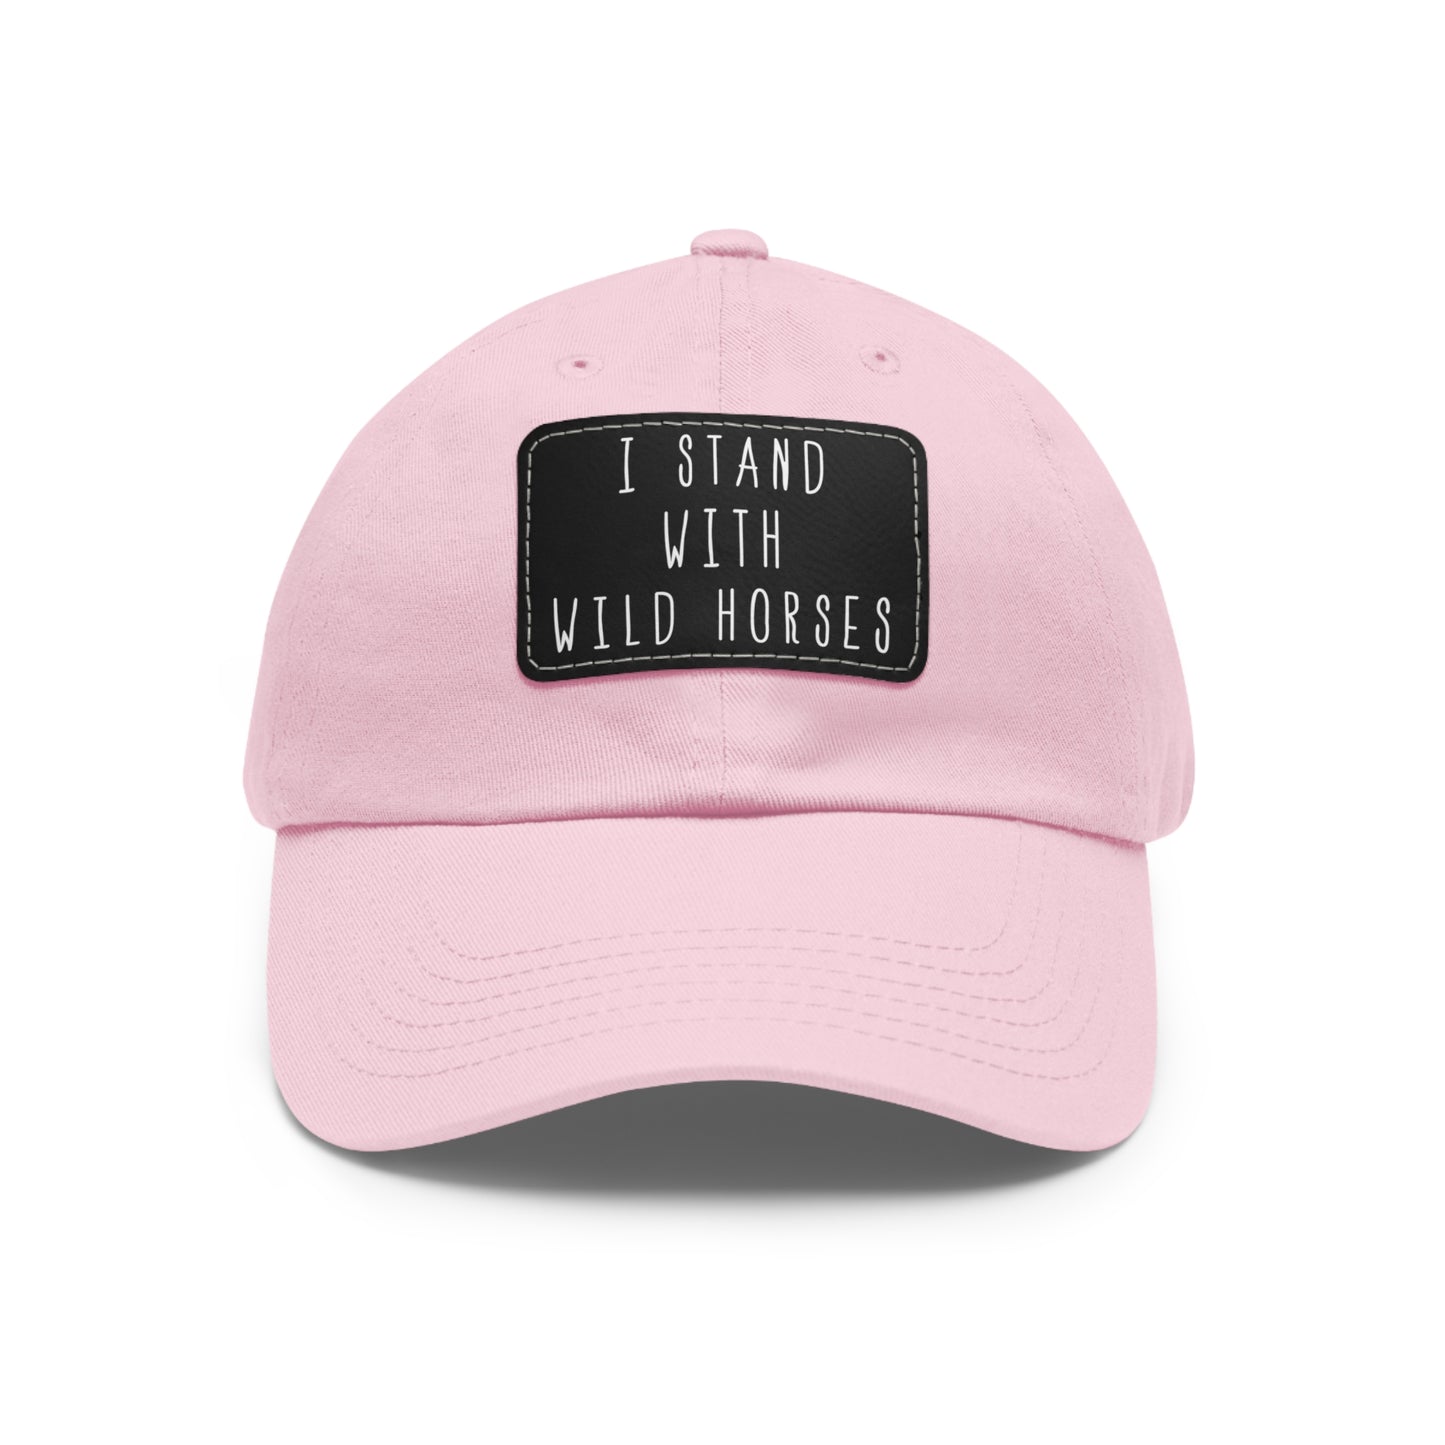 "I Stand..." Hat w/ Leather Patch